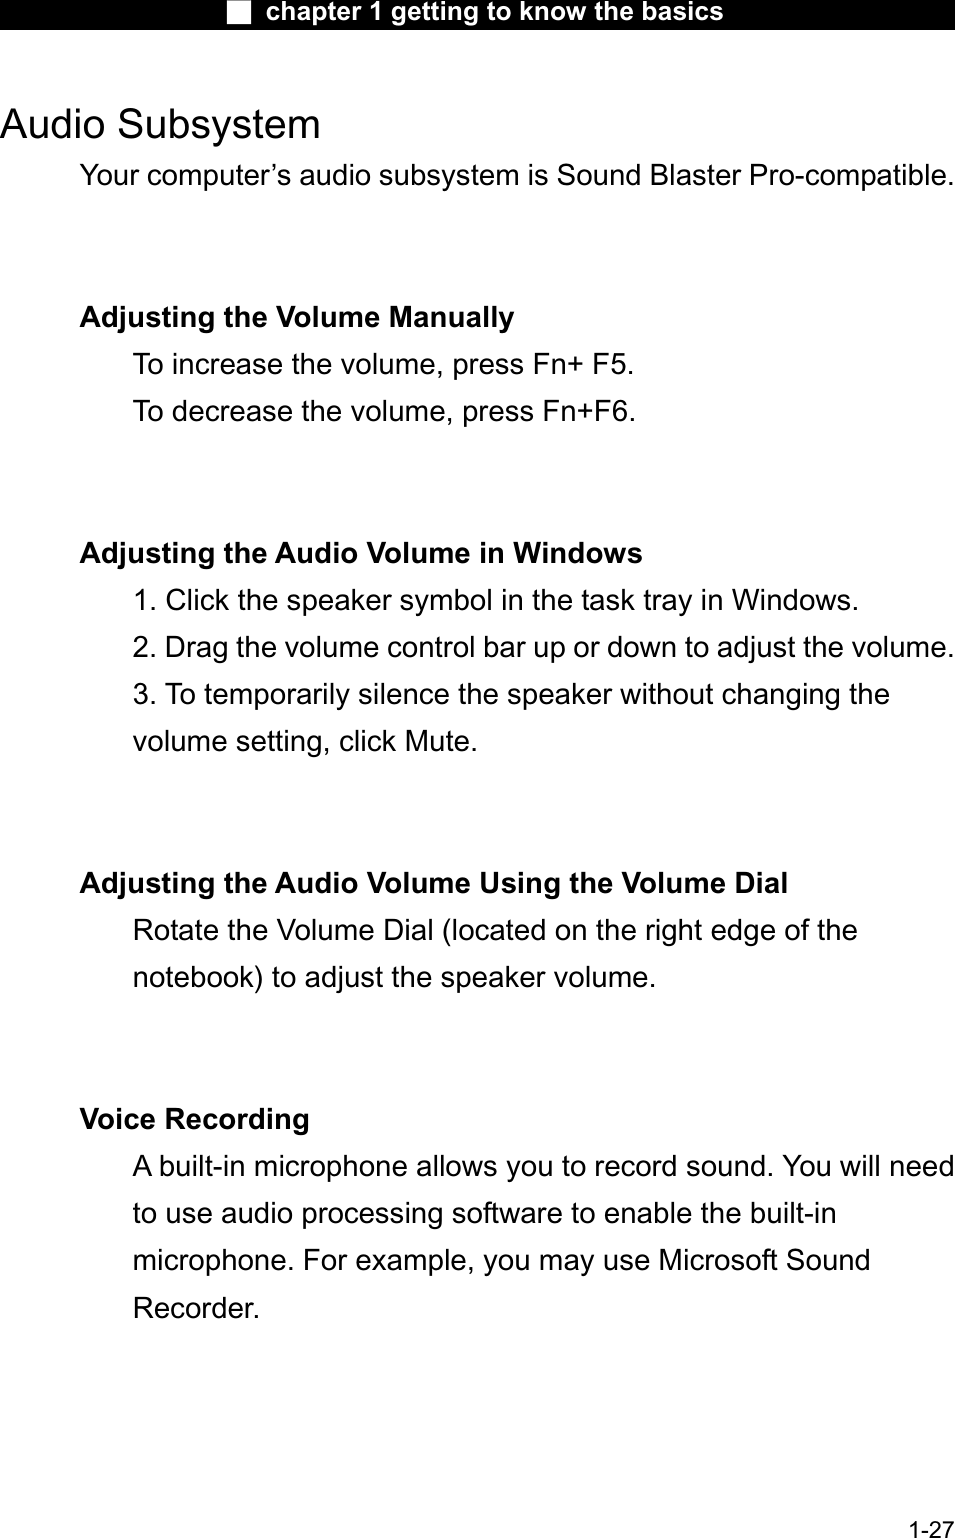 Ϯ chapter 1 getting to know the basicsAudio SubsystemYour computer’s audio subsystem is Sound Blaster Pro-compatible.Adjusting the Volume ManuallyTo increase the volume, press Fn+ F5. To decrease the volume, press Fn+F6.Adjusting the Audio Volume in Windows1. Click the speaker symbol in the task tray in Windows.2. Drag the volume control bar up or down to adjust the volume. 3. To temporarily silence the speaker without changing the volume setting, click Mute.Adjusting the Audio Volume Using the Volume Dial Rotate the Volume Dial (located on the right edge of thenotebook) to adjust the speaker volume.Voice RecordingA built-in microphone allows you to record sound. You will needto use audio processing software to enable the built-in microphone. For example, you may use Microsoft SoundRecorder.1-27